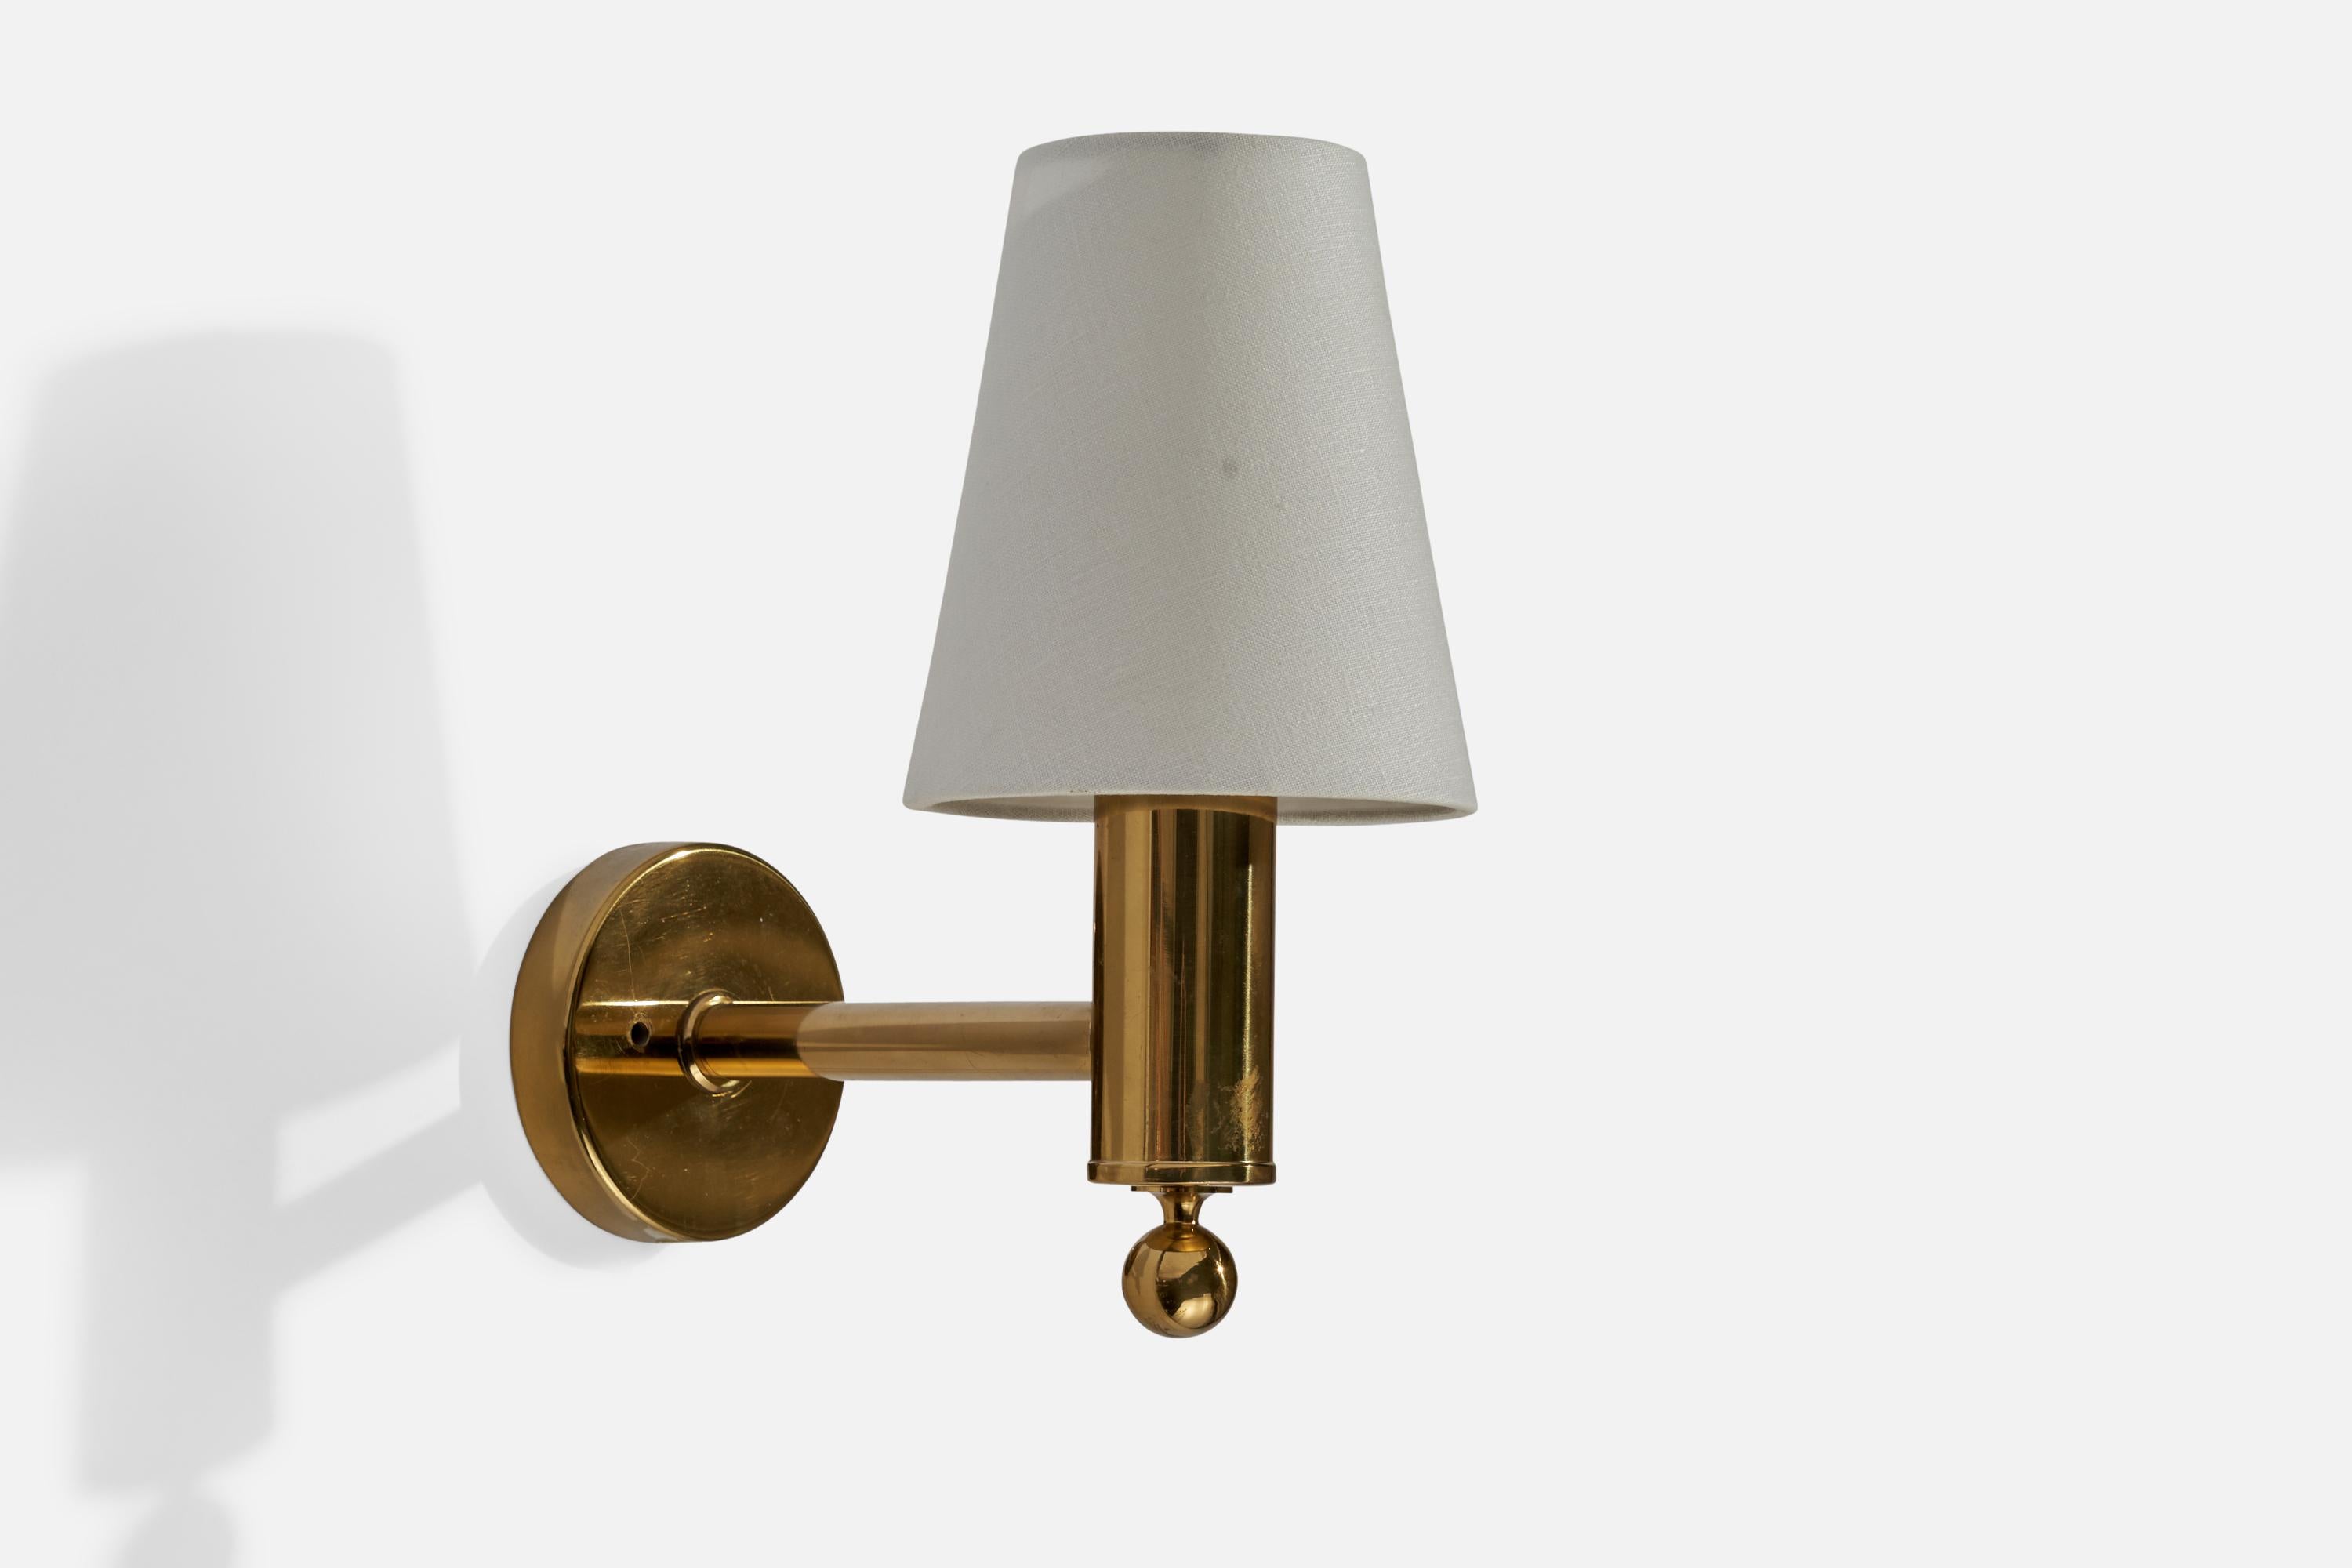 A brass and white fabric wall light designed and produced in Sweden, 1960s.

Overall Dimensions (inches): 10.5”  H x 5.25” W x 9” D
Back Plate Dimensions (inches): 3.75”  H x 3.75”  W x .75” D
Bulb Specifications: E-26 Bulb
Number of Sockets: 1
All